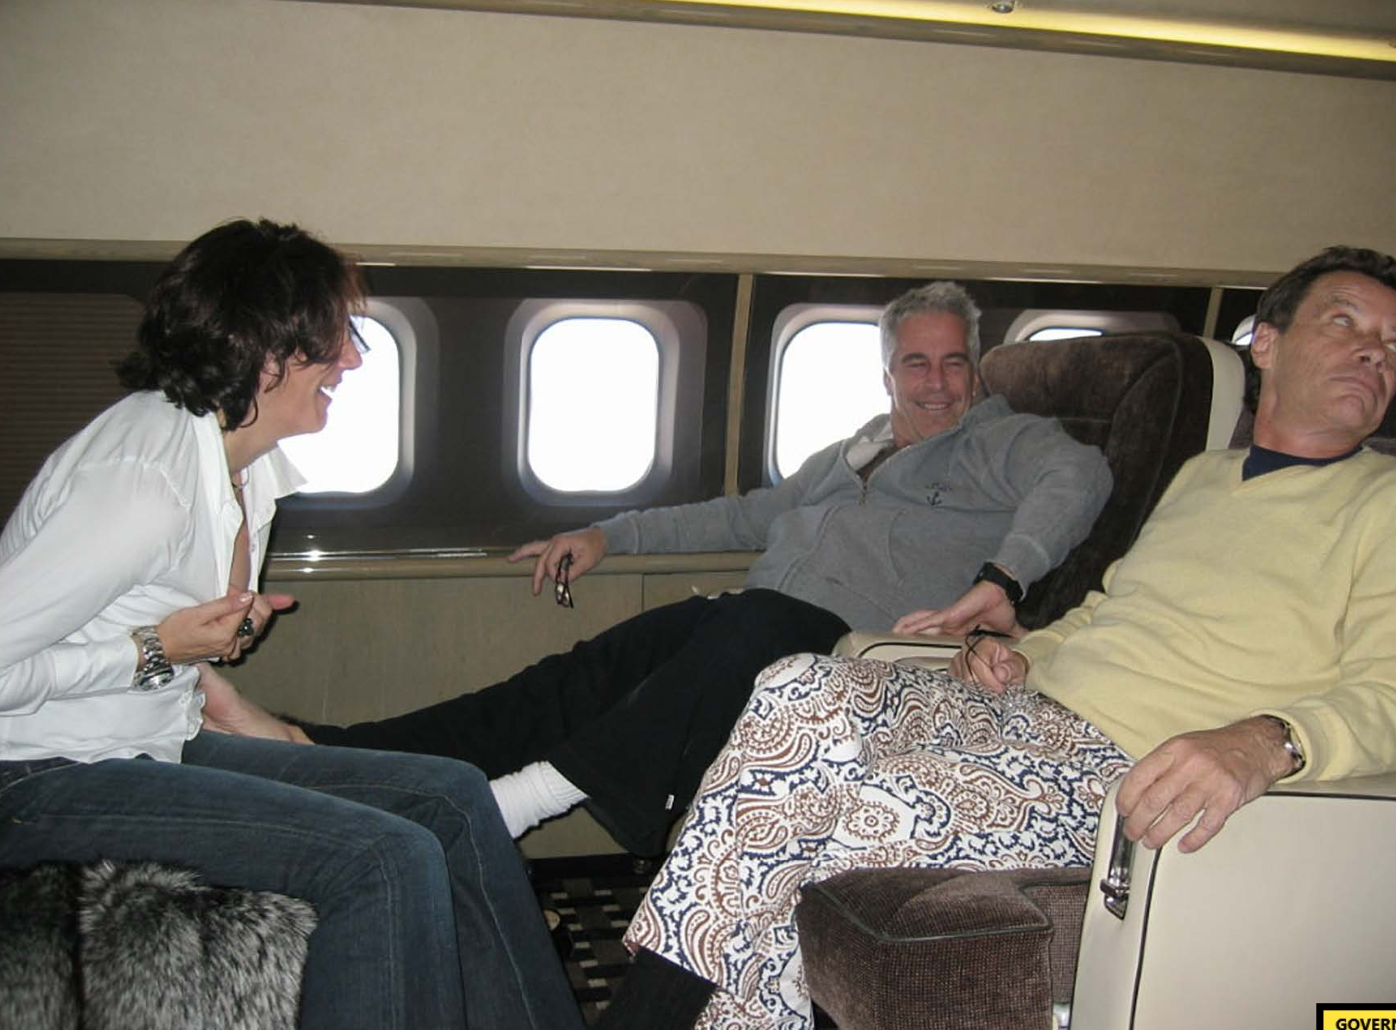 Maxwell gives Epstein a massage on board a private jet in a photograph released during her trial. Jean-Luc Brunel, right, died in prison after being accused of child sex-trafficking